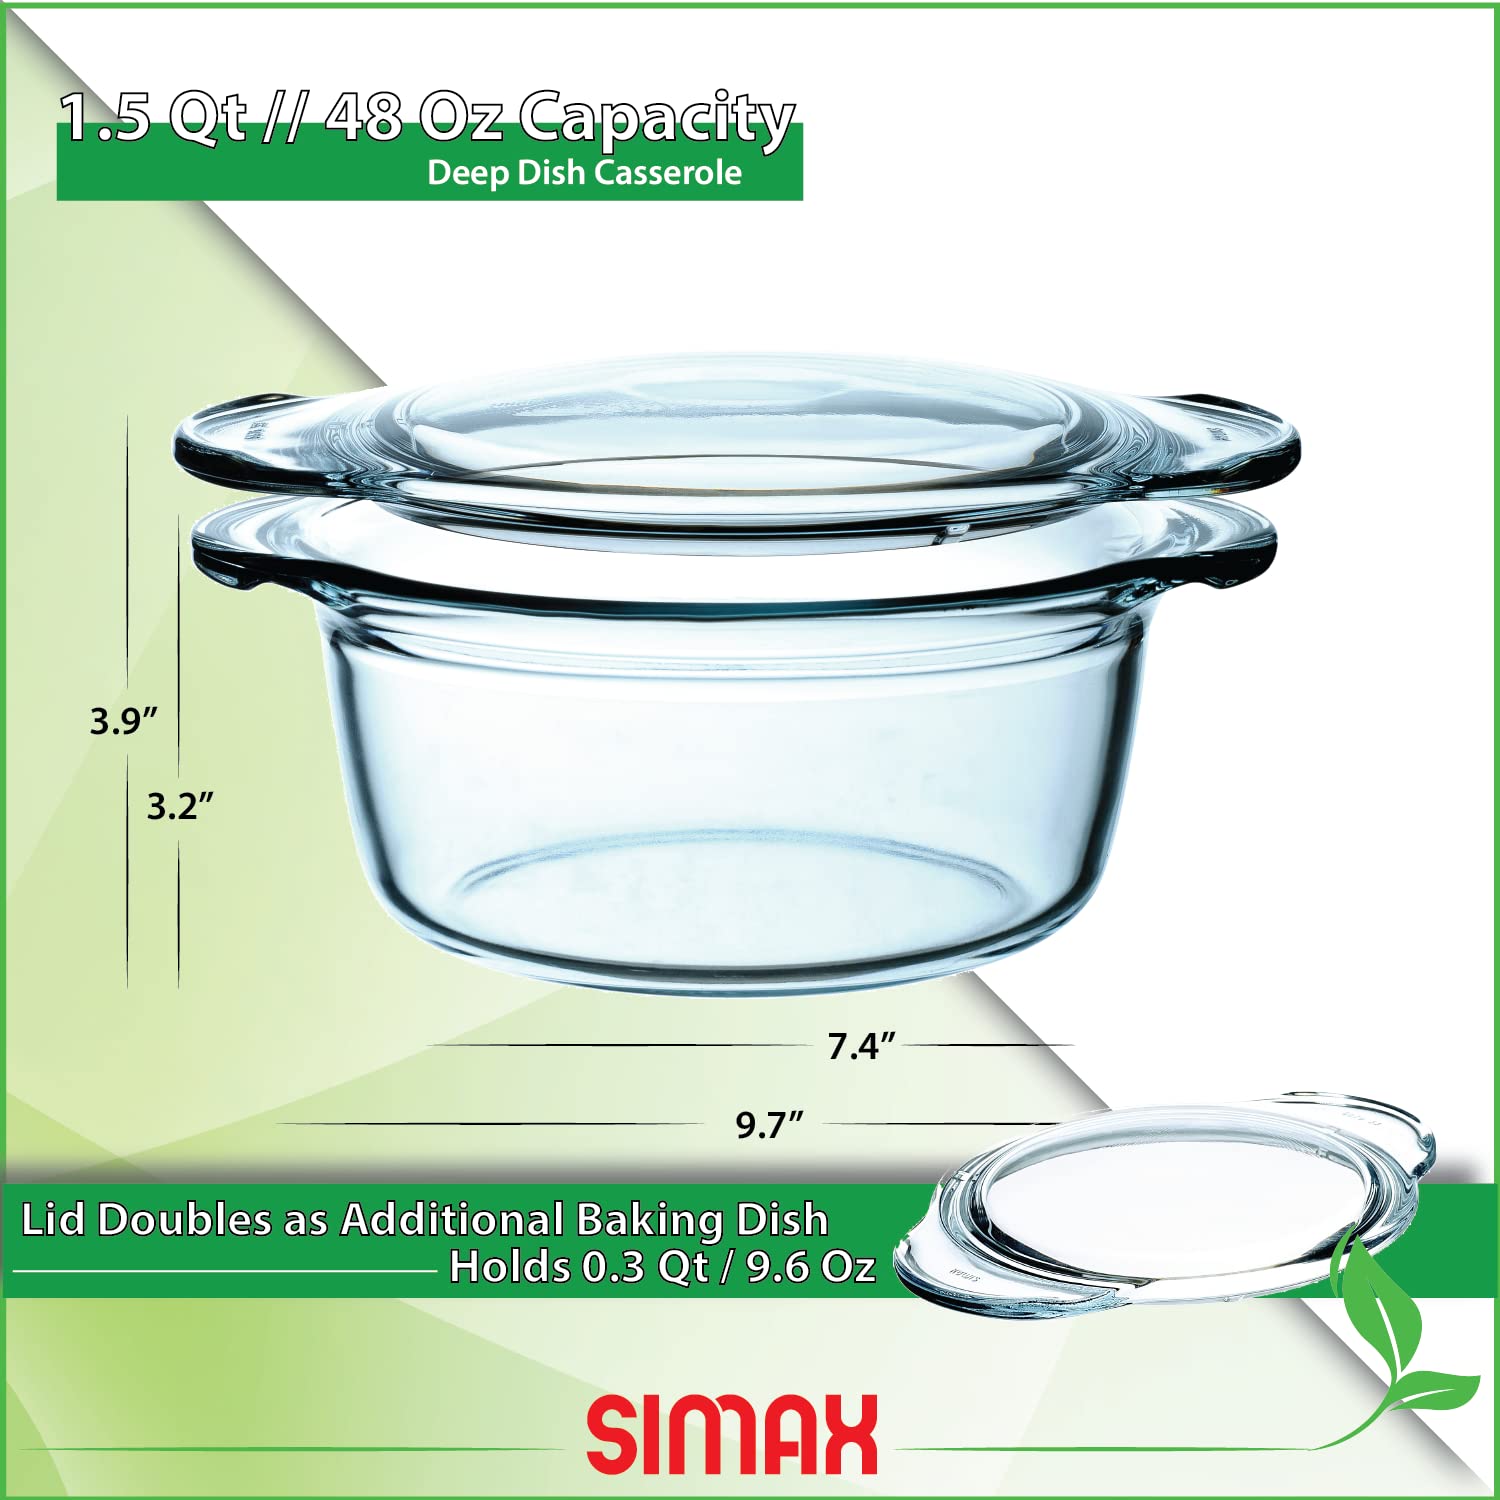 Simax Casserole Dish with Lid, Glass Casserole Dish, Holds 48 Oz (1.5 Quarts), Oven to Table Serving Dish, Microwave, Dishwasher, and Oven Safe Cookware